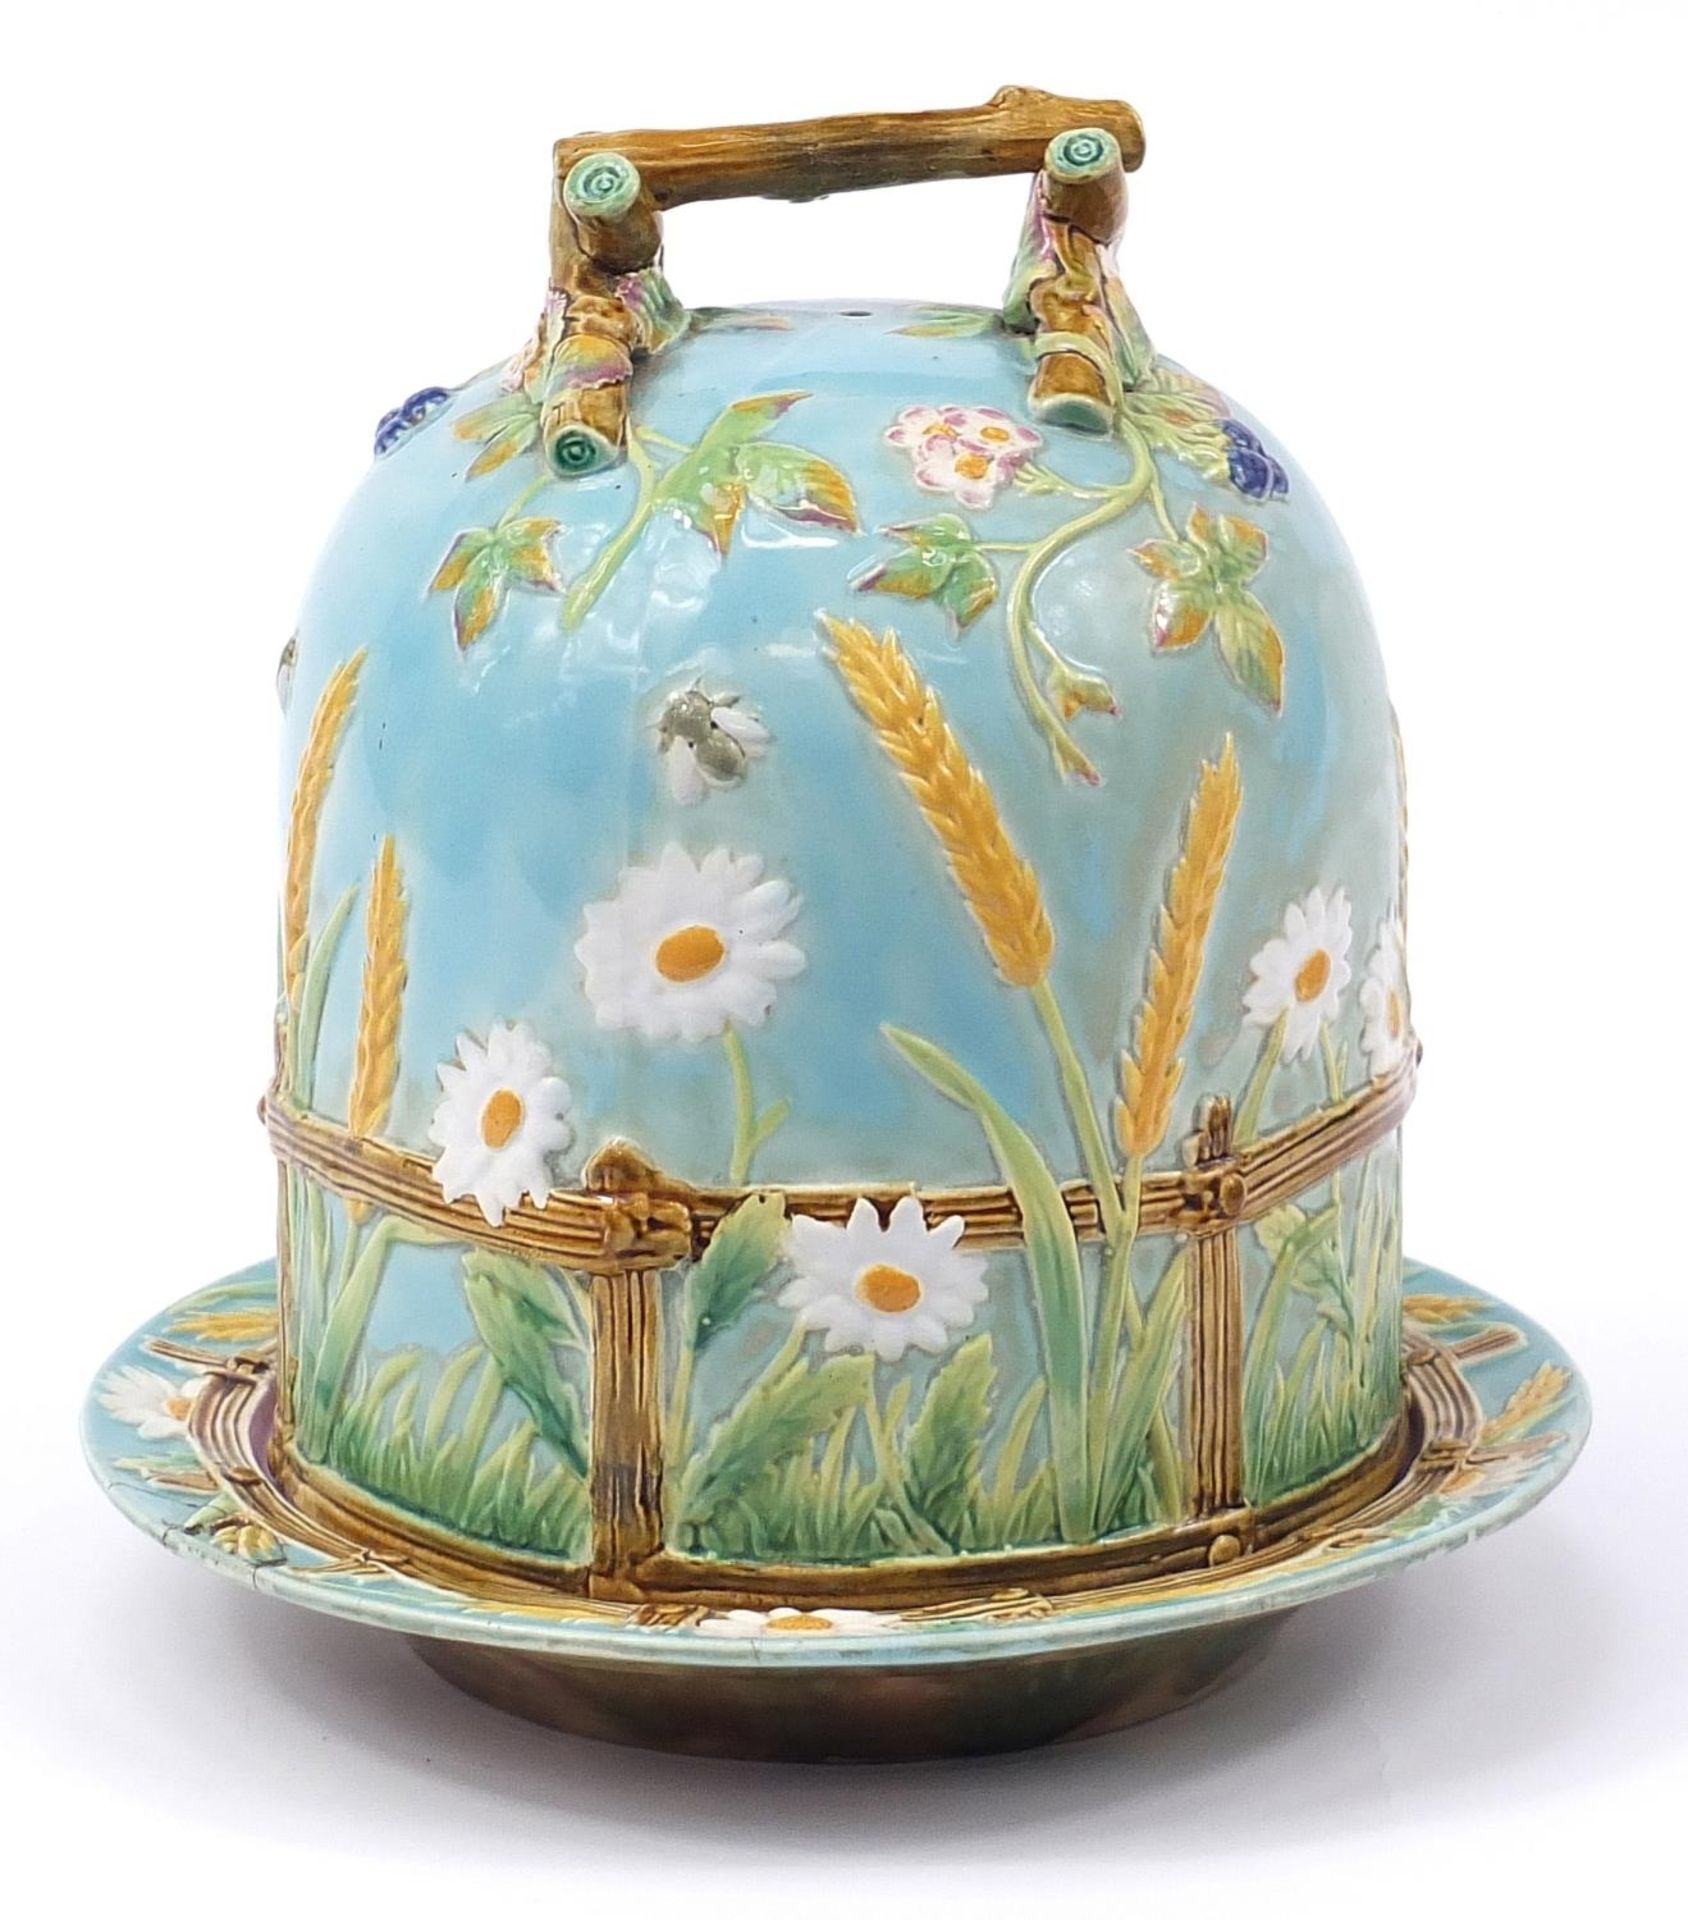 George Jones for Crescent, Victorian Majolica cheese dome on stand hand painted with insects and